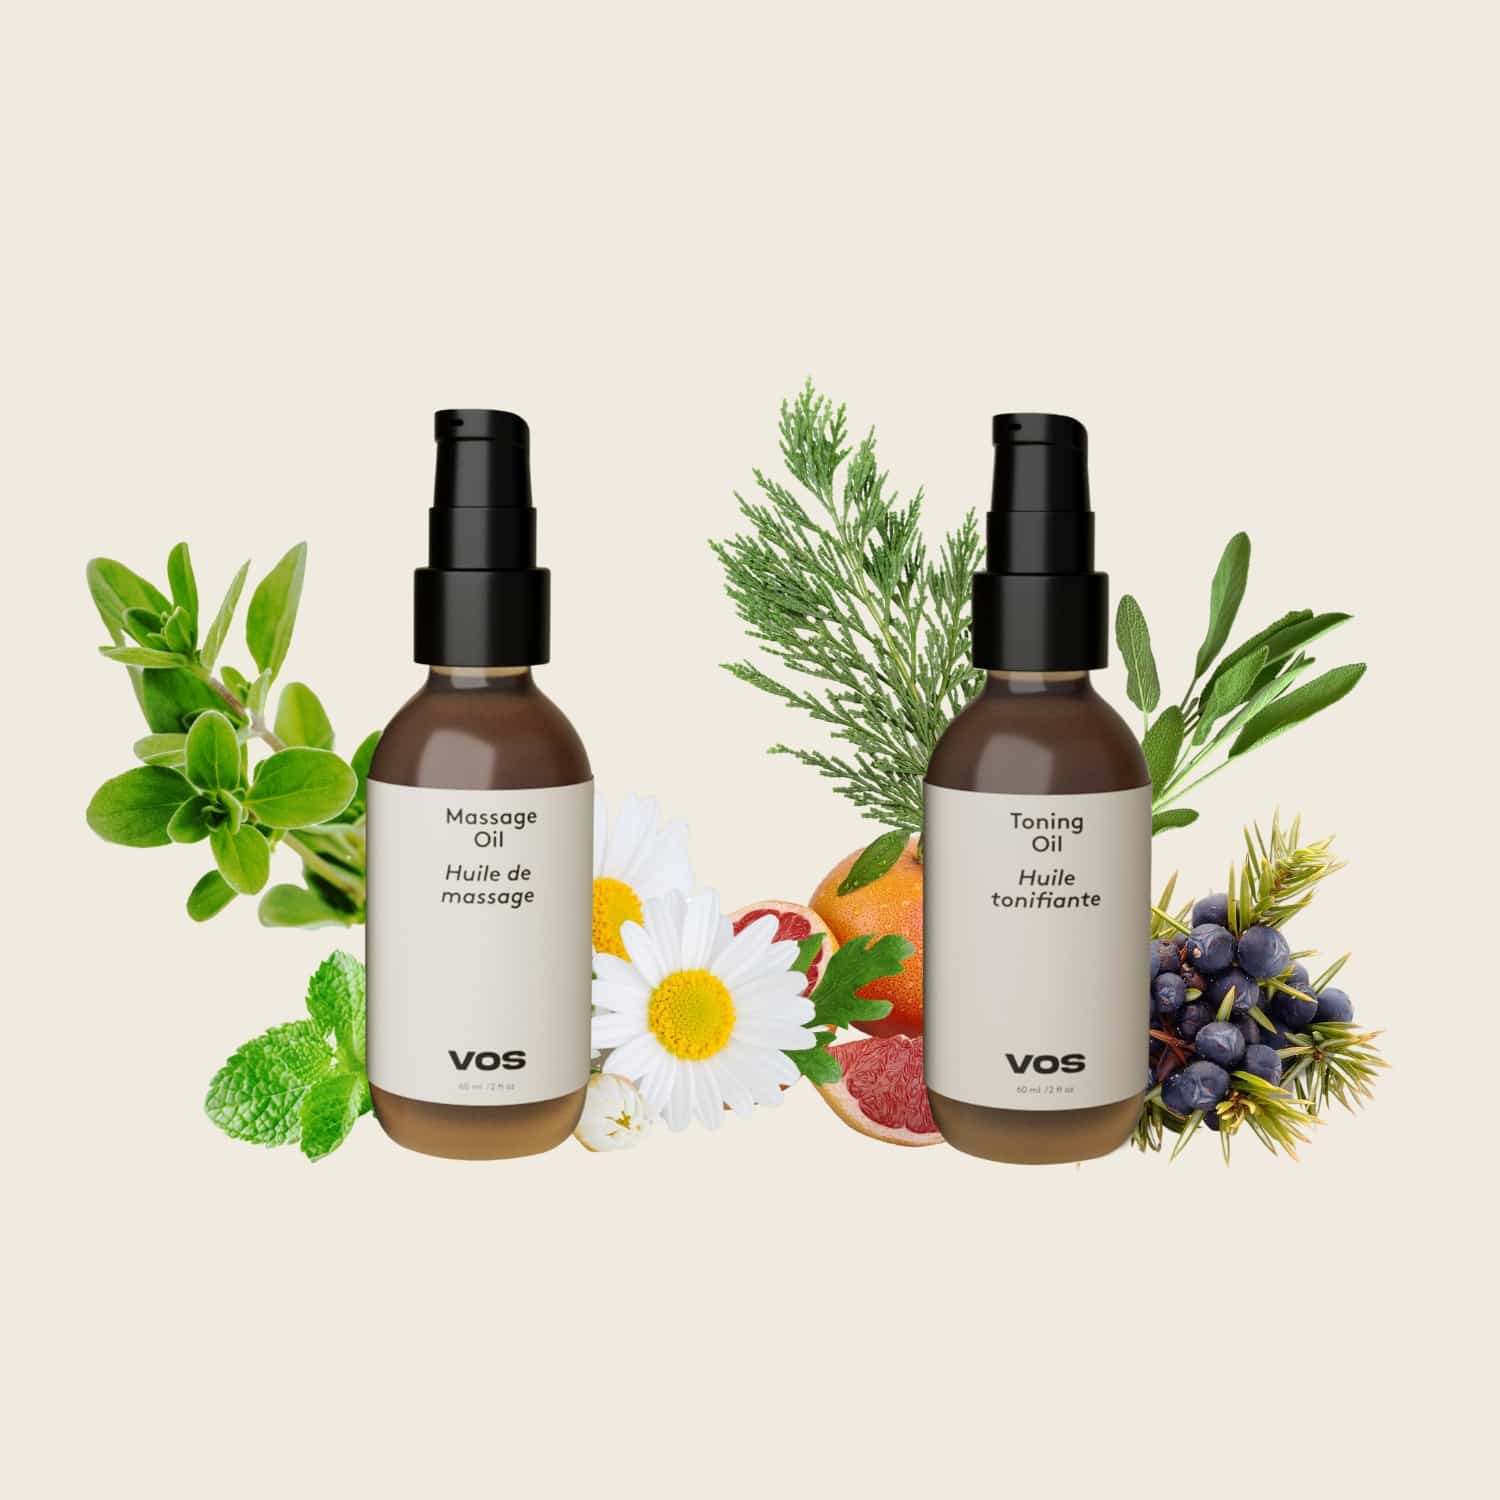 Product with Essential oil description